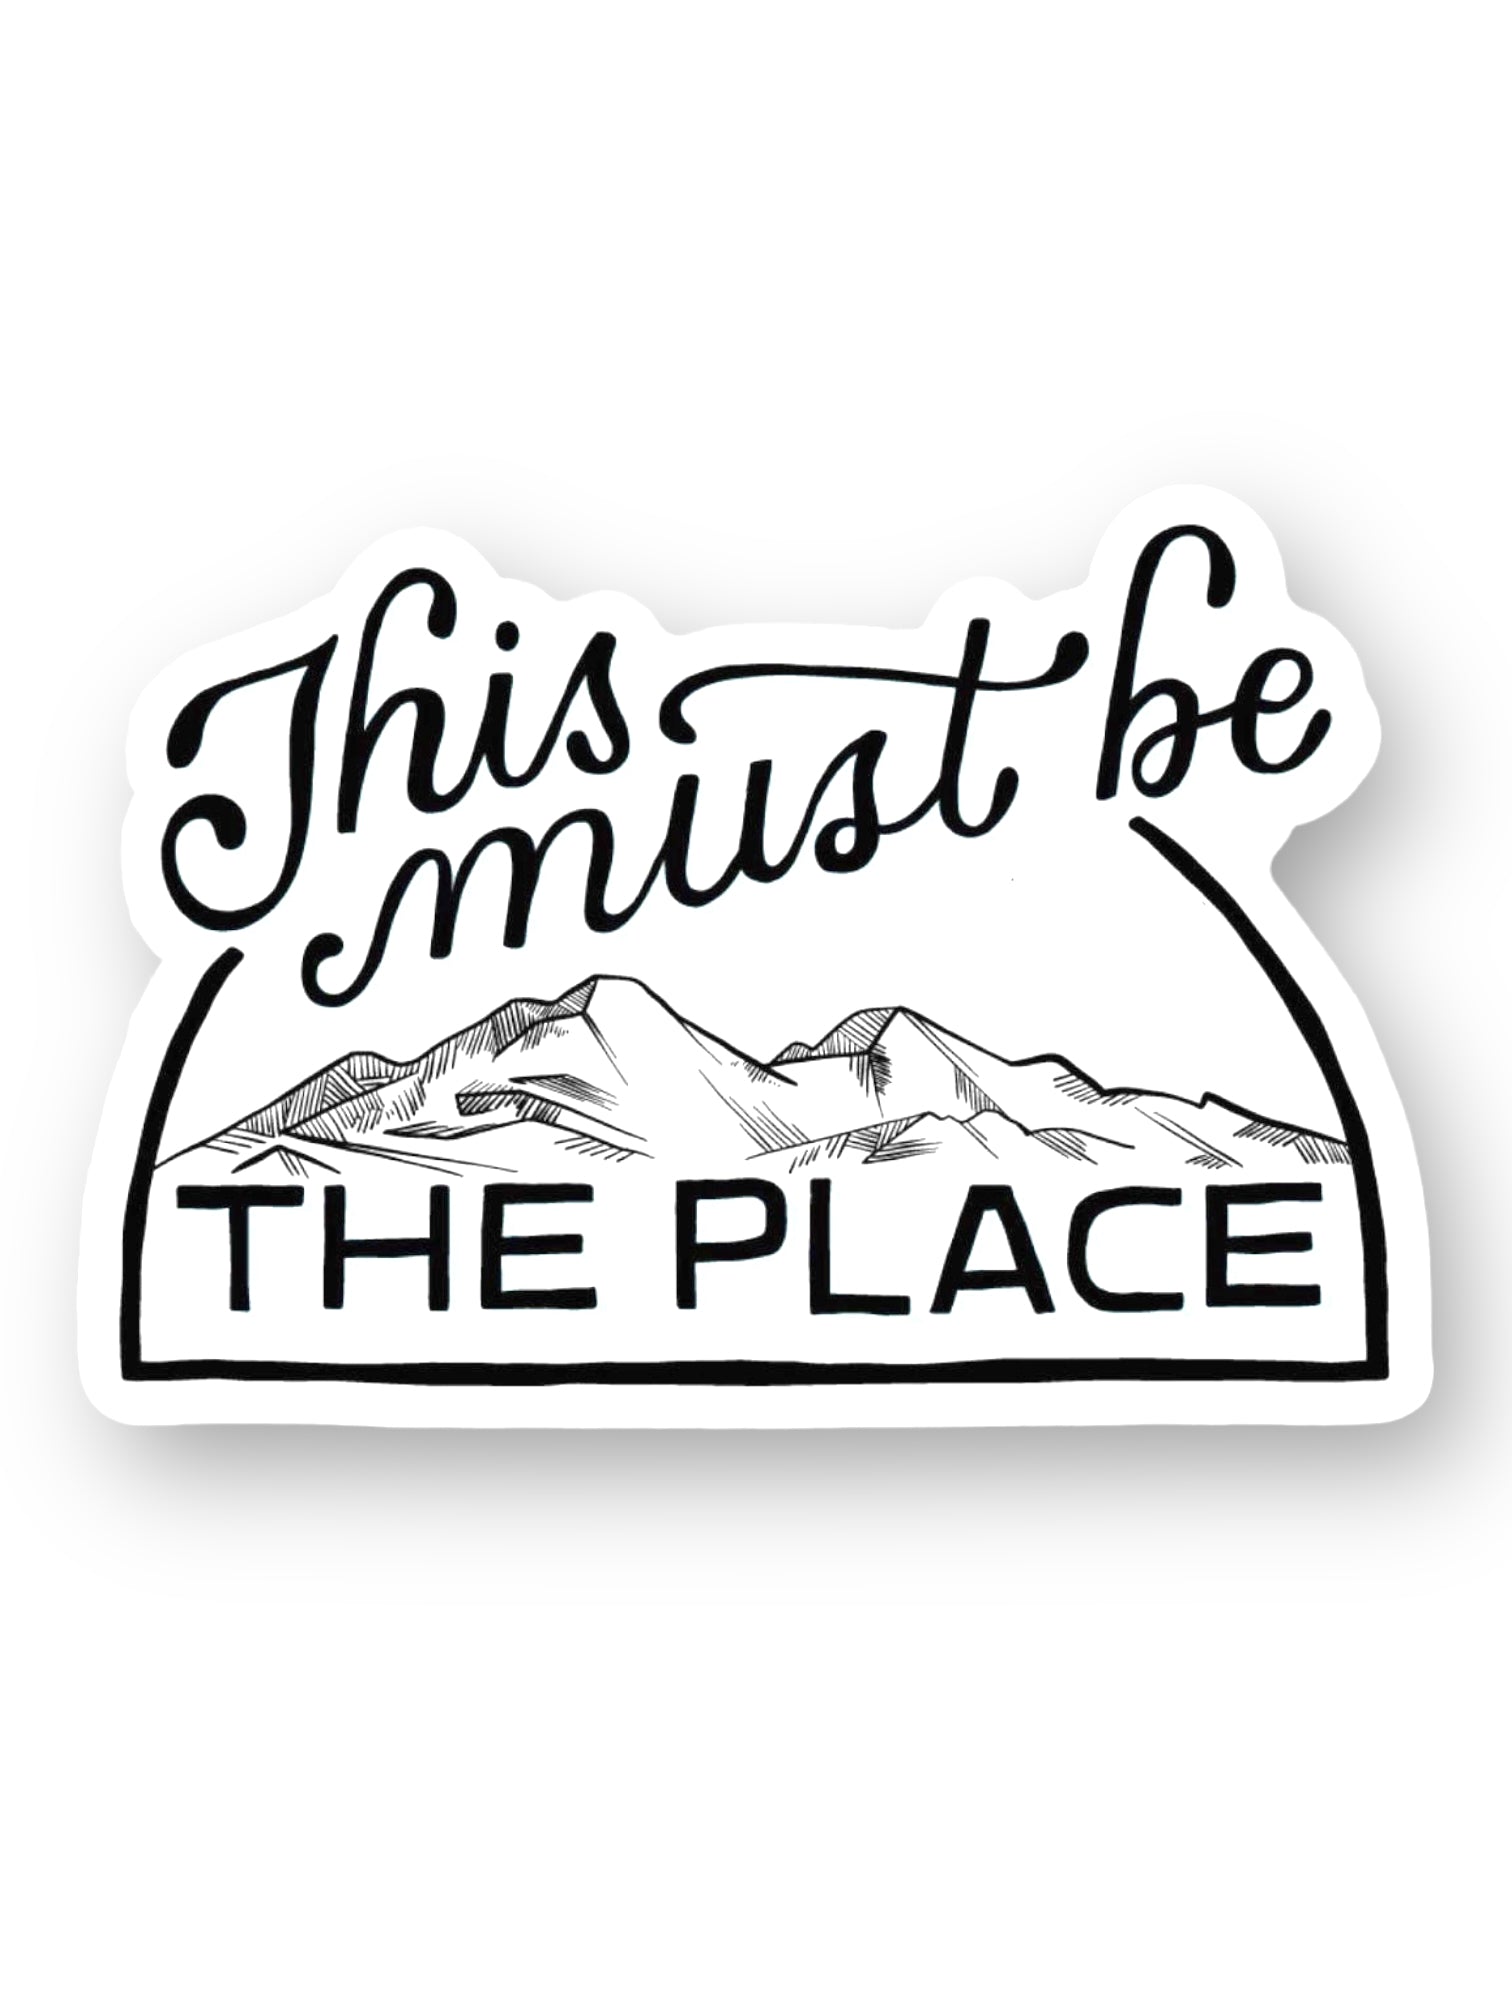 This Must Be The Place, Talking Heads Lyrics Quote Sticker by Big Moods, Sold by Le Monkey House